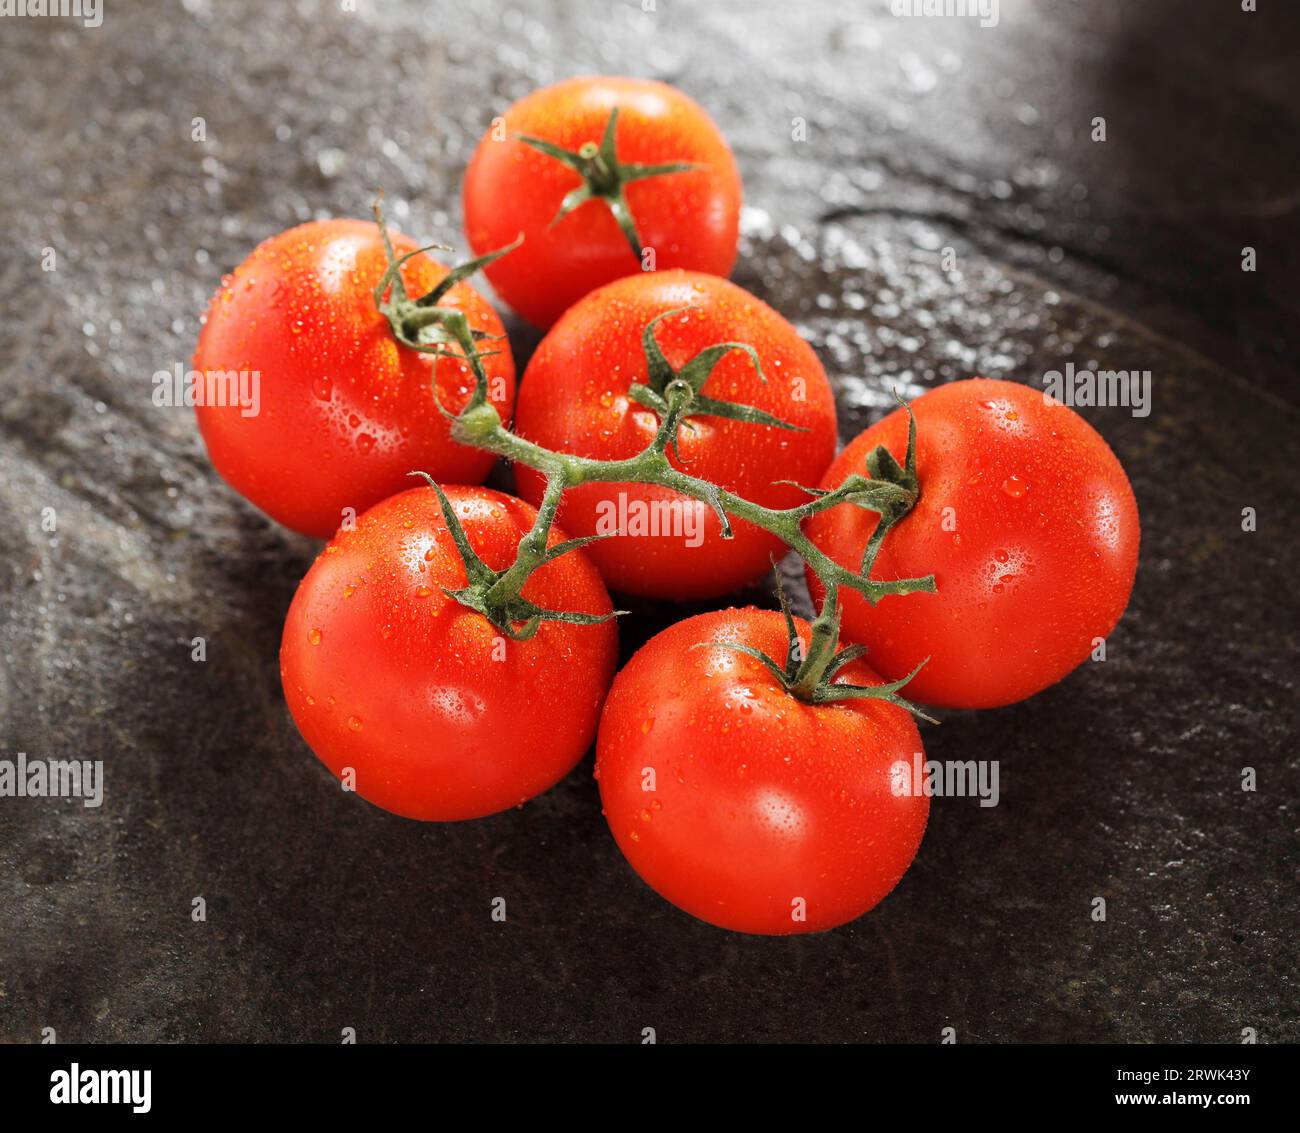 Ripe red tomatoes on stone Stock Photo